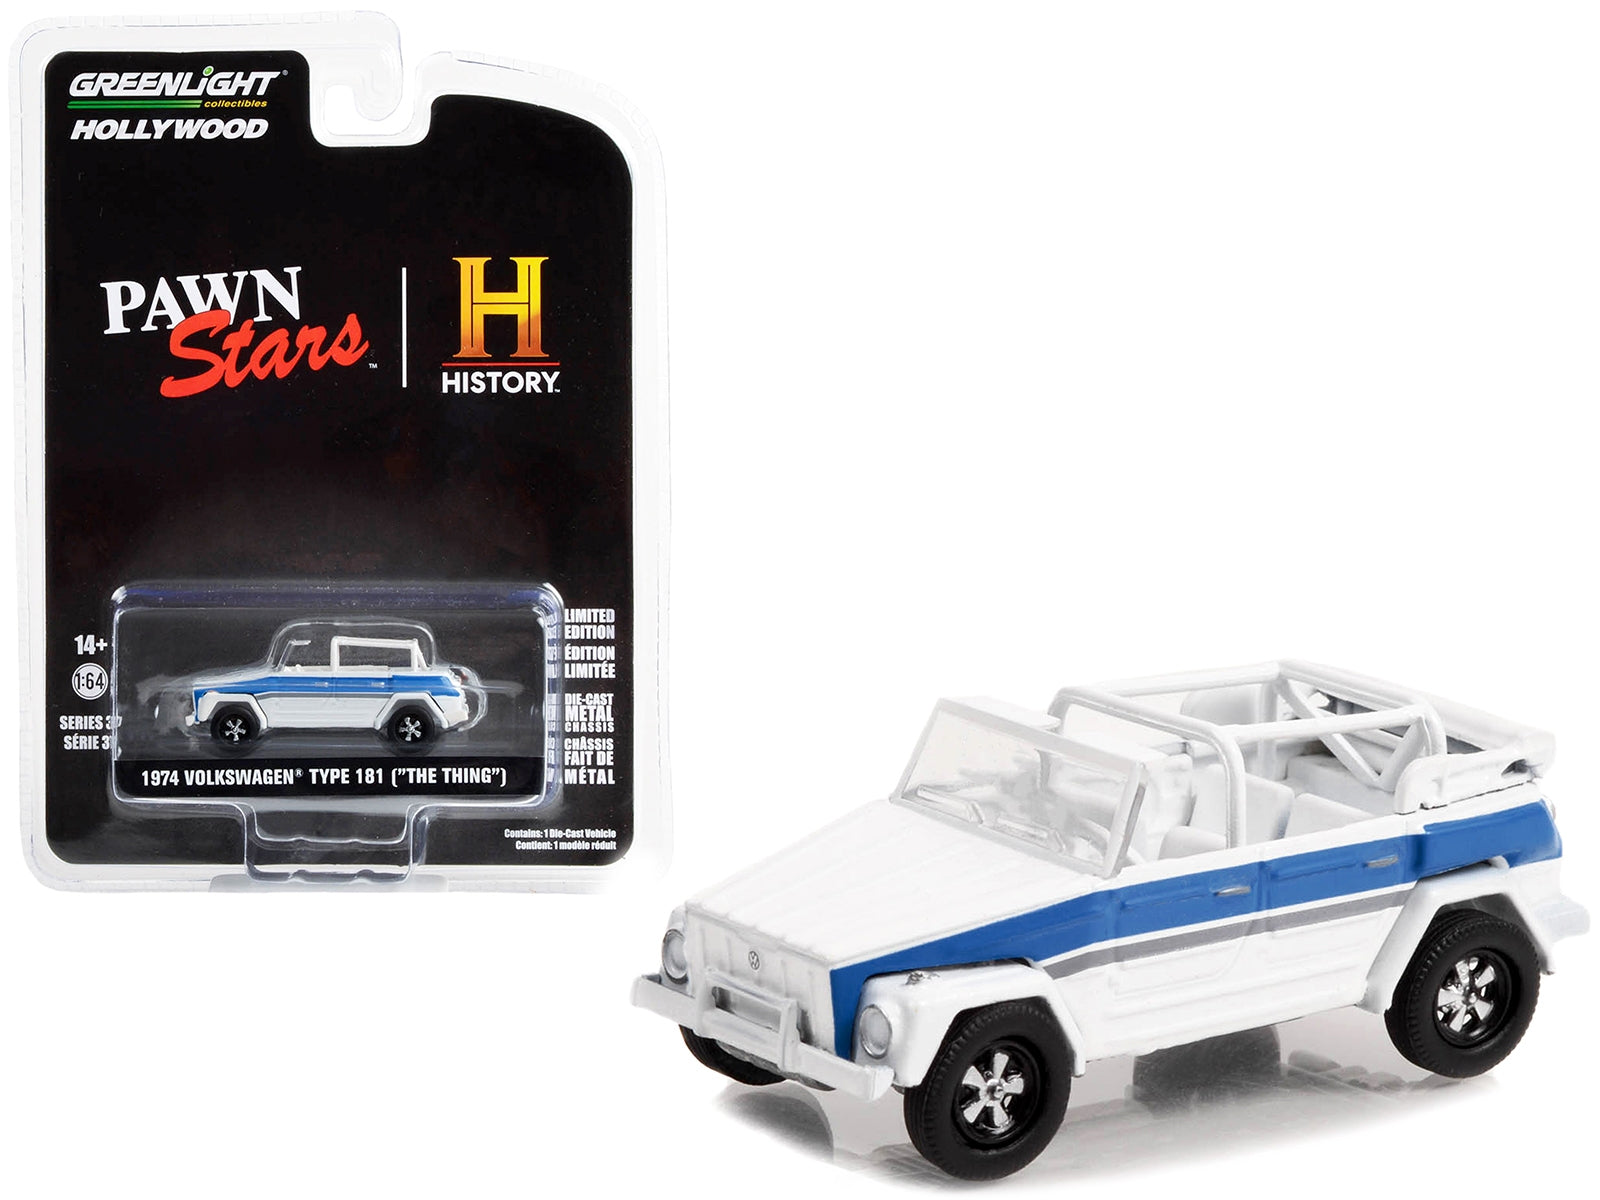 1974 Volkswagen Thing (Type 181) White with Blue Stripes "Pawn Stars" (2009-Current) TV Series "Hollywood Series" Release 37 1/64 Diecast Model Car by Greenlight